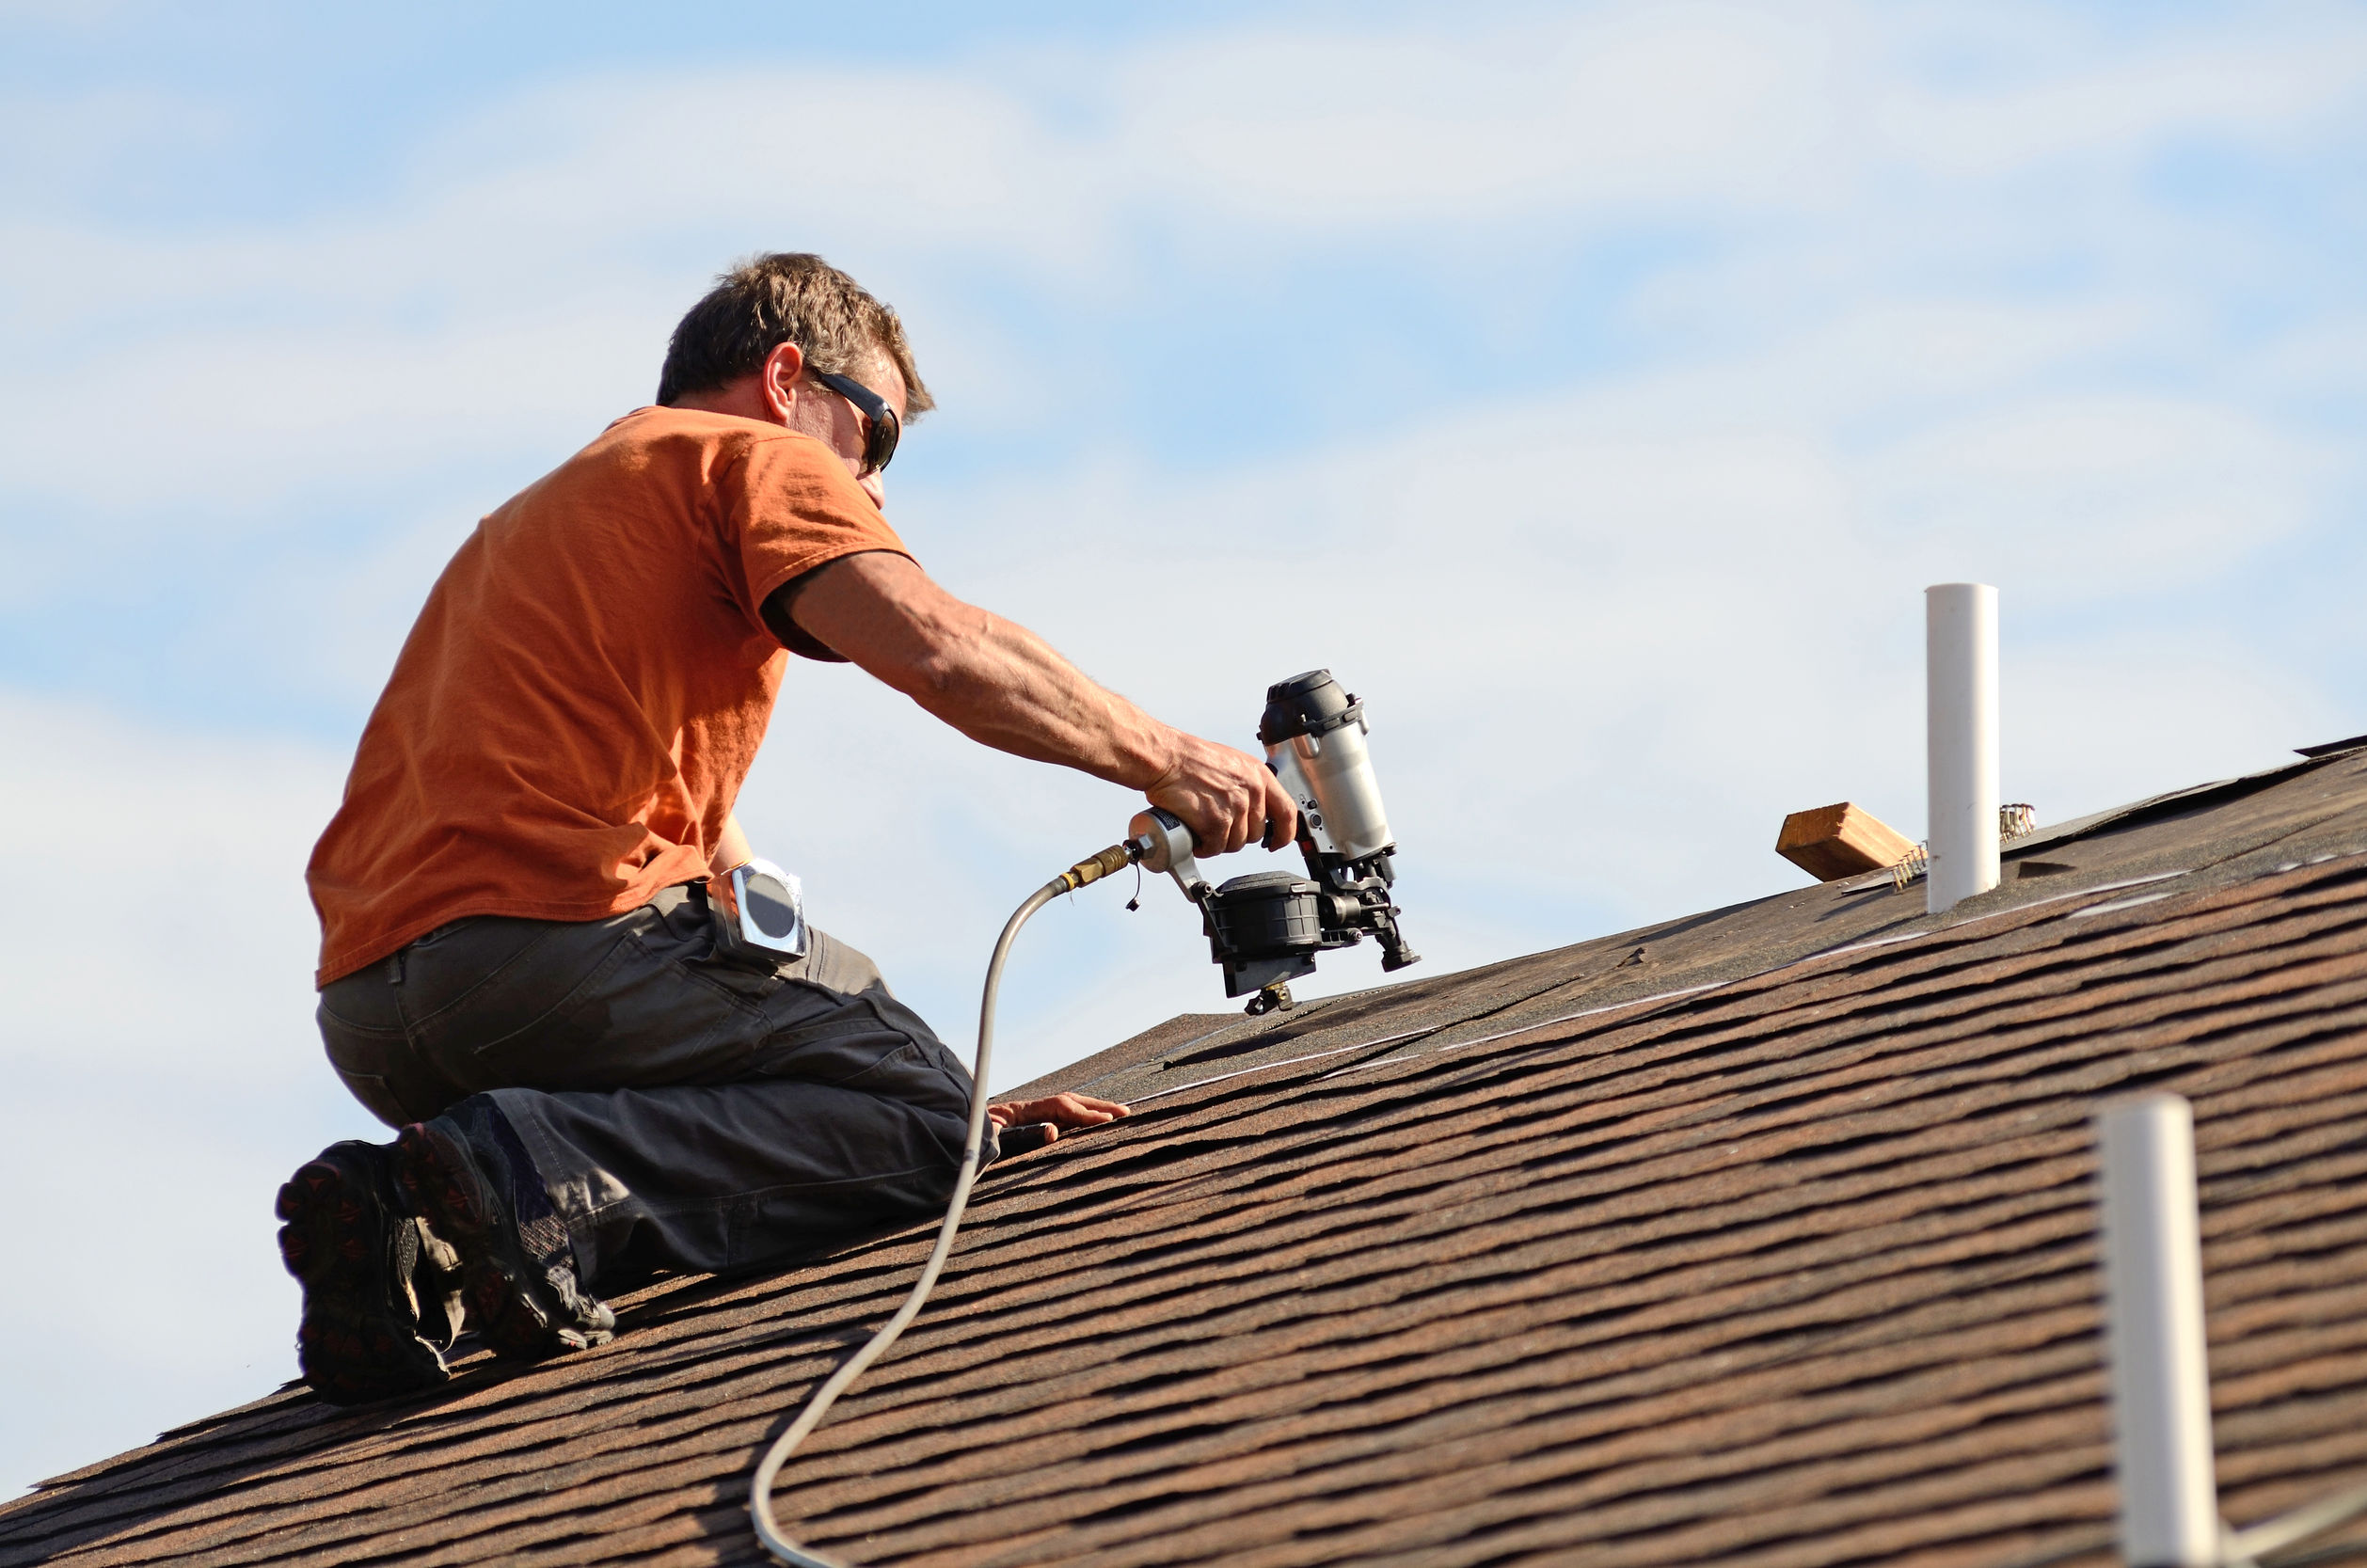 Contact Experienced Roofing Contractors in Greenville, SC, for Any and All Roofing Problems